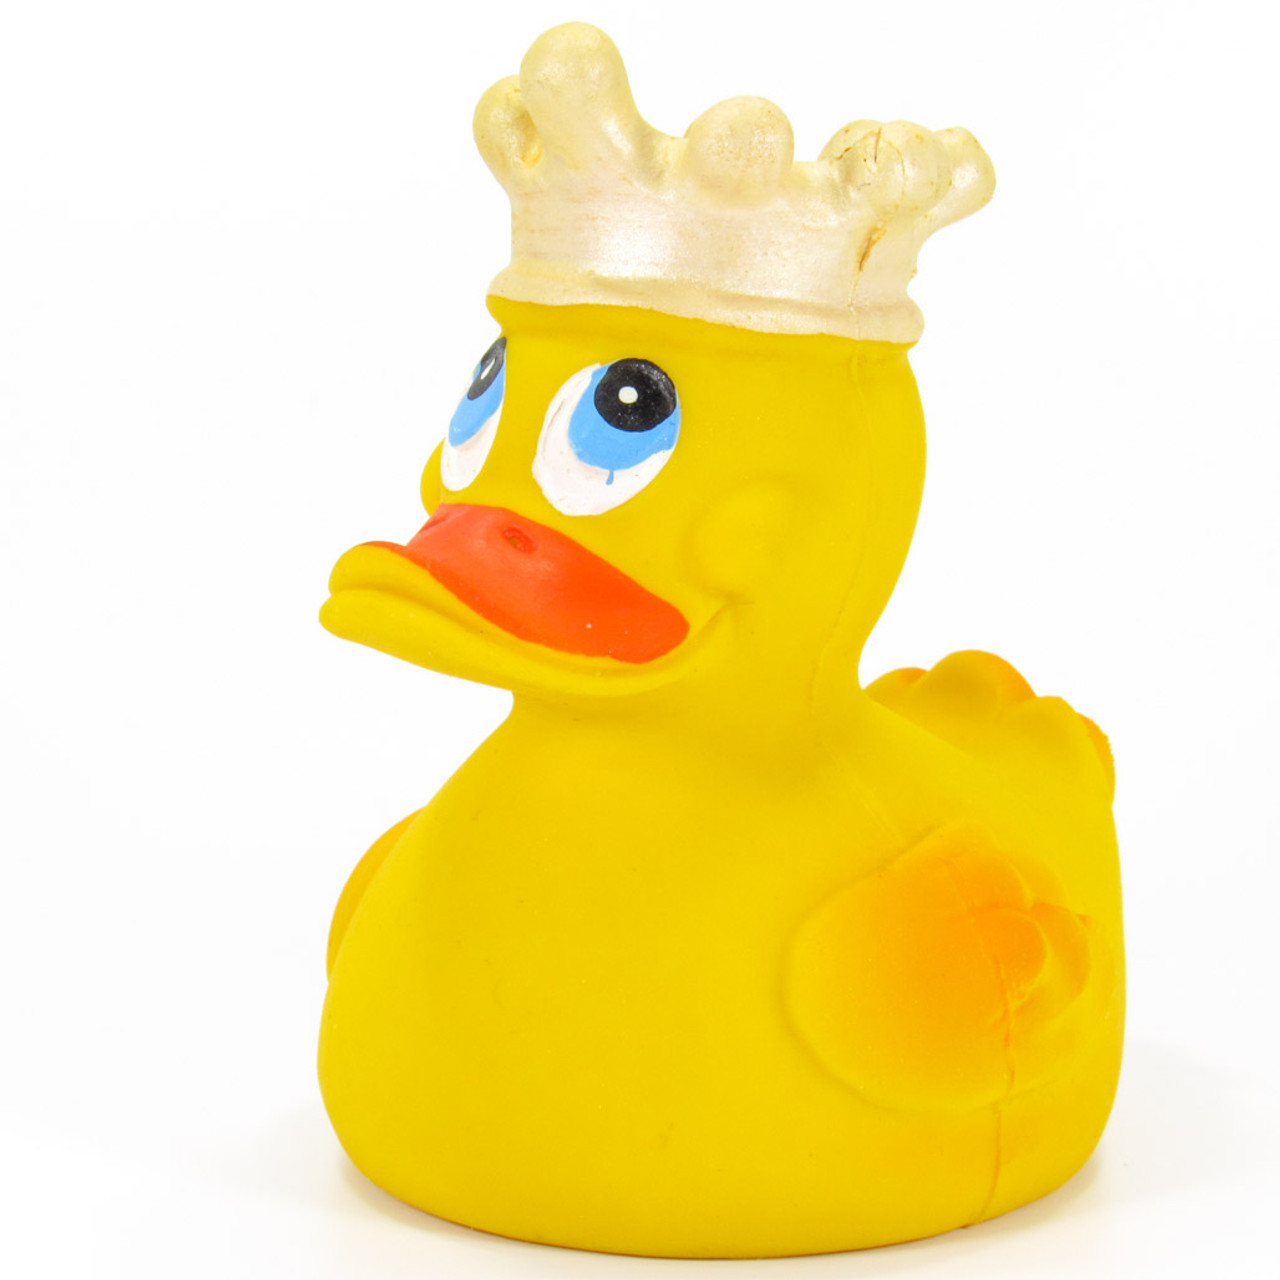 The Finger Rubber Duck from Lanco - $12.99 : Ducks Only